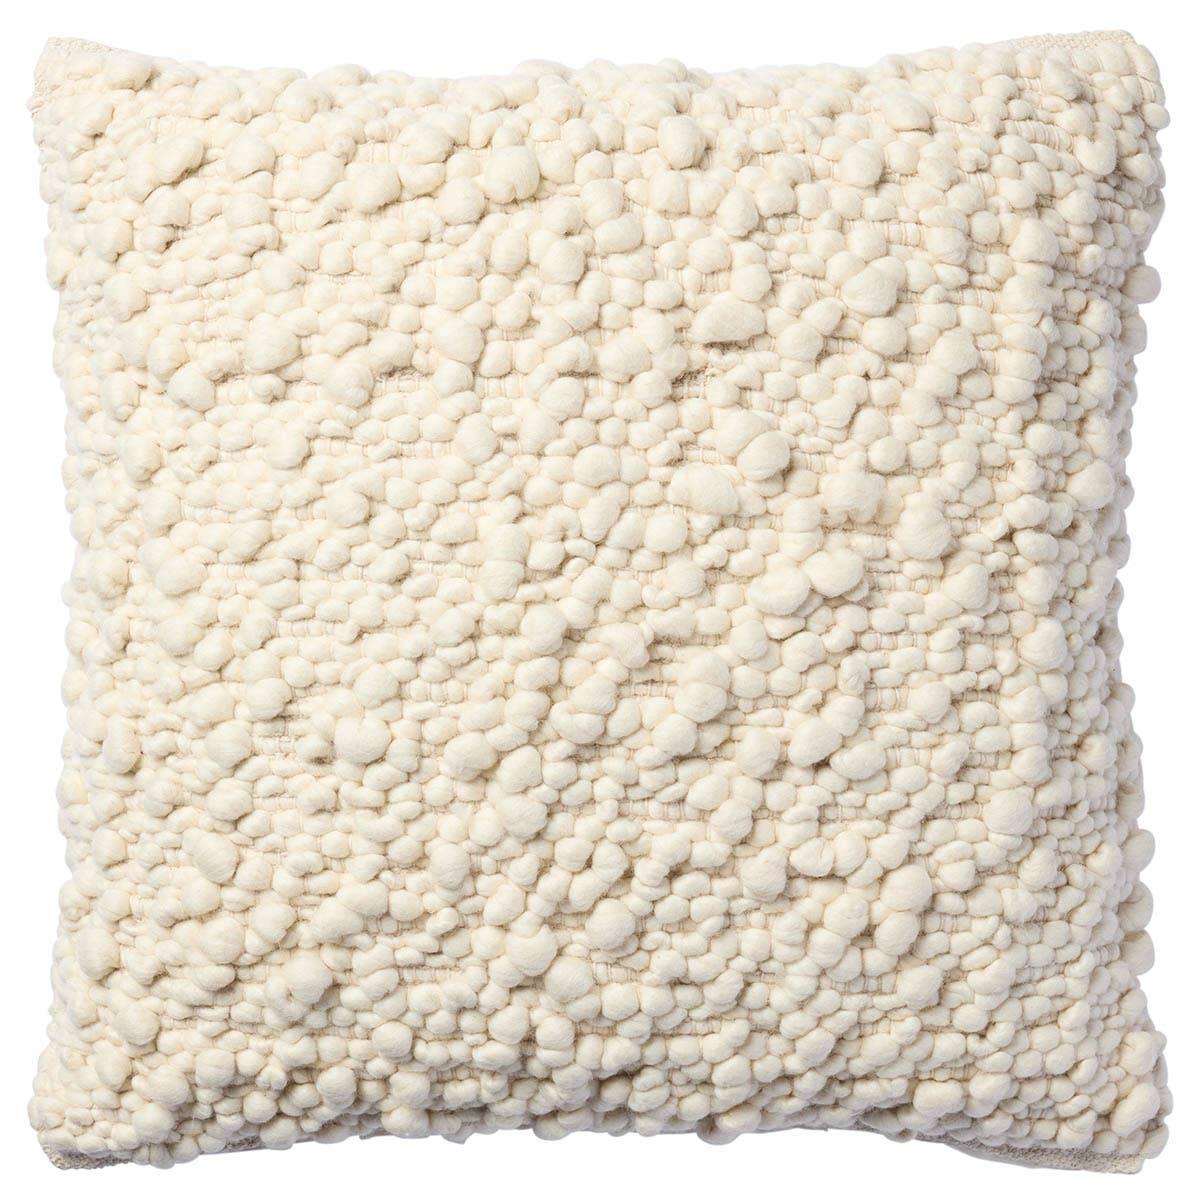 The textural finish of the Freya pillow is inspired by grape agate, a rare mineral found in Mamuju, a small area of Indonesia. Handcrafted of 100% cream wool, this throw pillow perfectly accents modern indoor spaces.Indoor Pillow Amethyst Home provides interior design, new home construction design consulting, vintage area rugs, and lighting in the Dallas metro area.